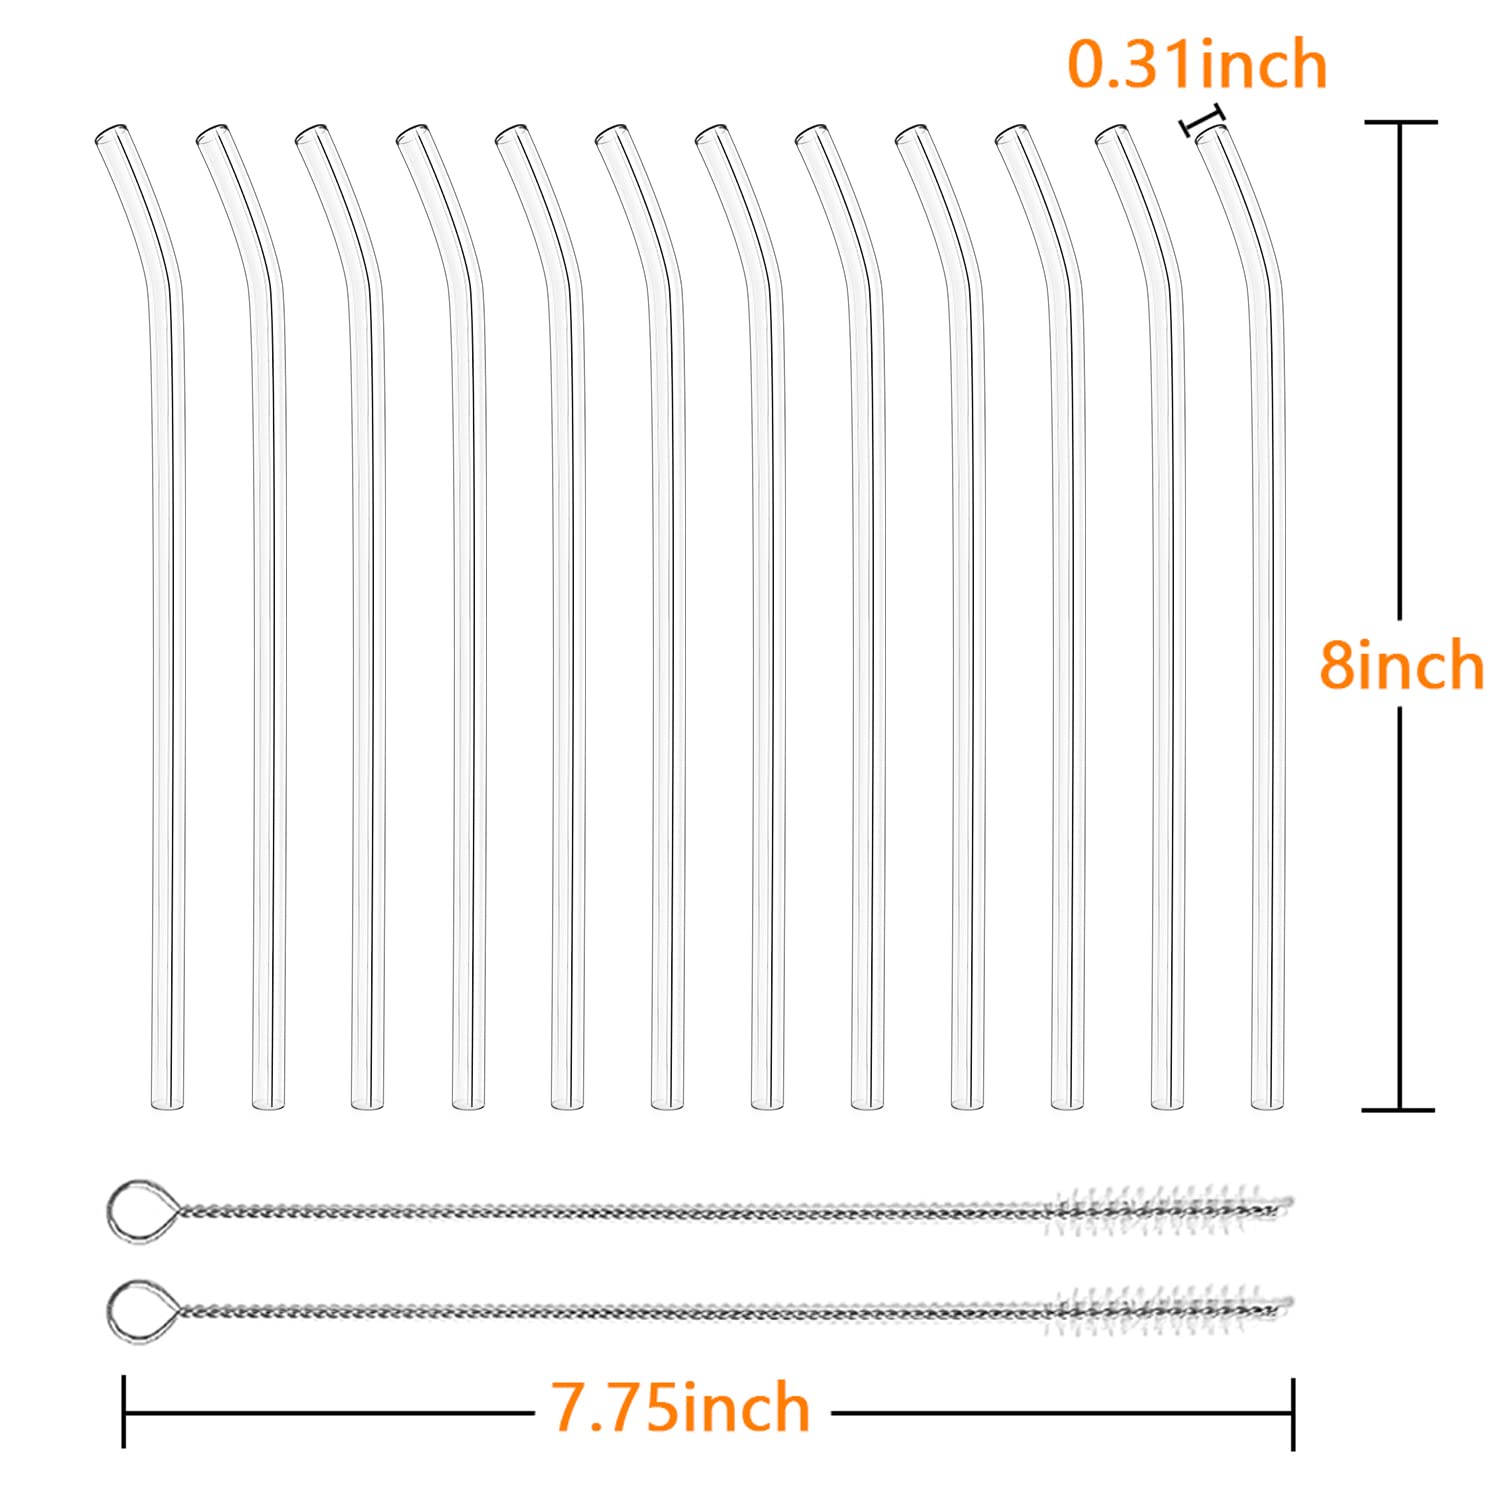 12 Pack Reusable Glass Straws - 8" x 8 MM, Bent Glass Drinking Straws with 2 Cleaning Brushes, Reusable Straws for Smoothies, Milkshake, Frozen Drinks, Tea, Juice